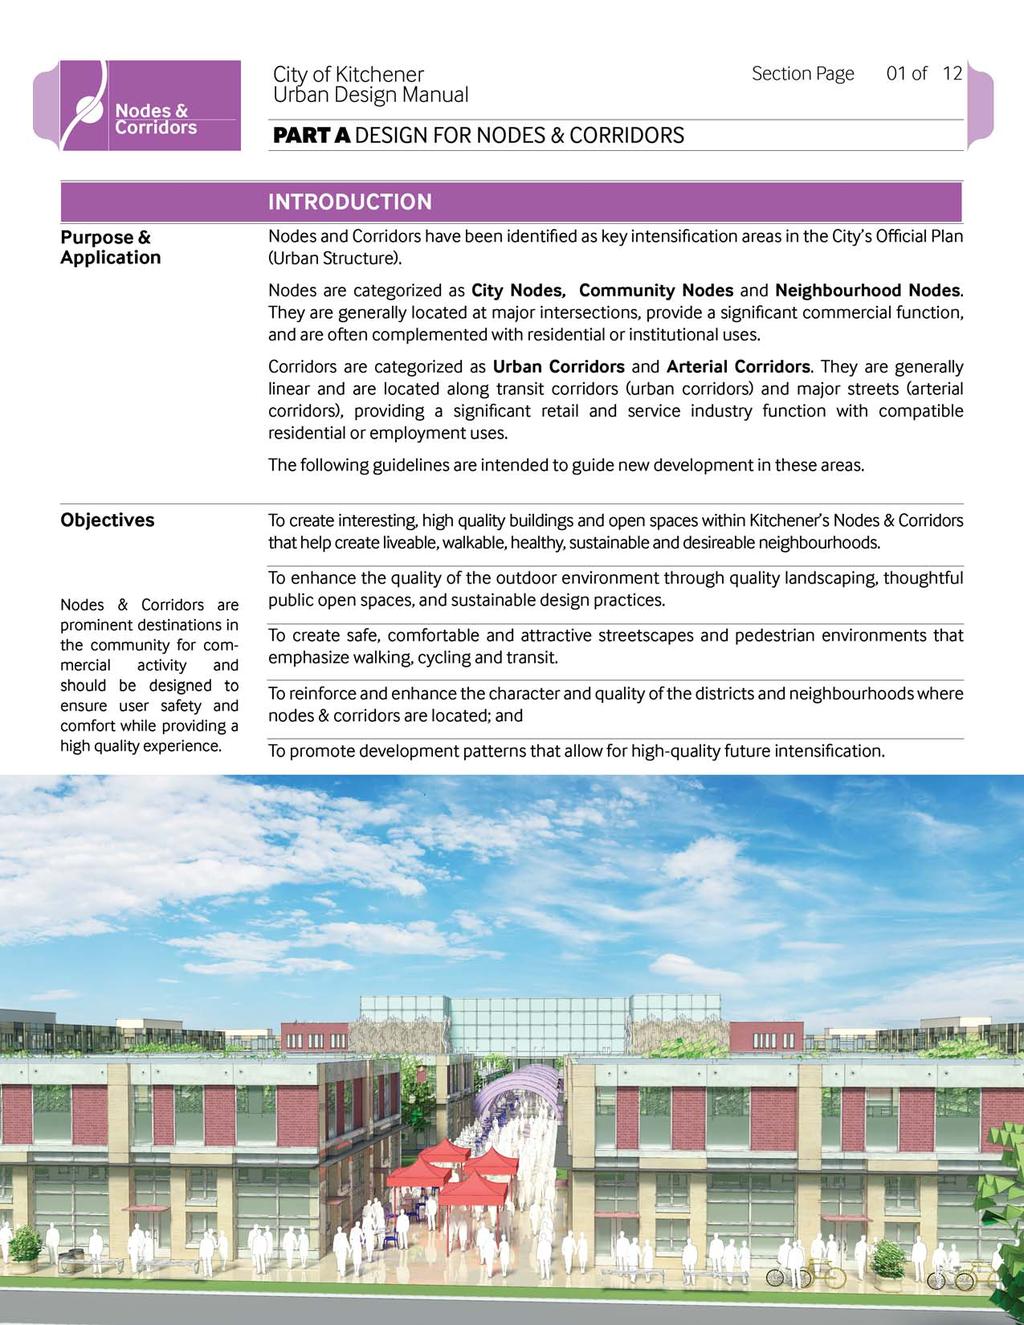 Section Page 01 of 12 2 INTRODUCTION Purpose & Application Nodes and Corridors have been identified as key intensification areas in the City's Official Plan (Urban Structure).